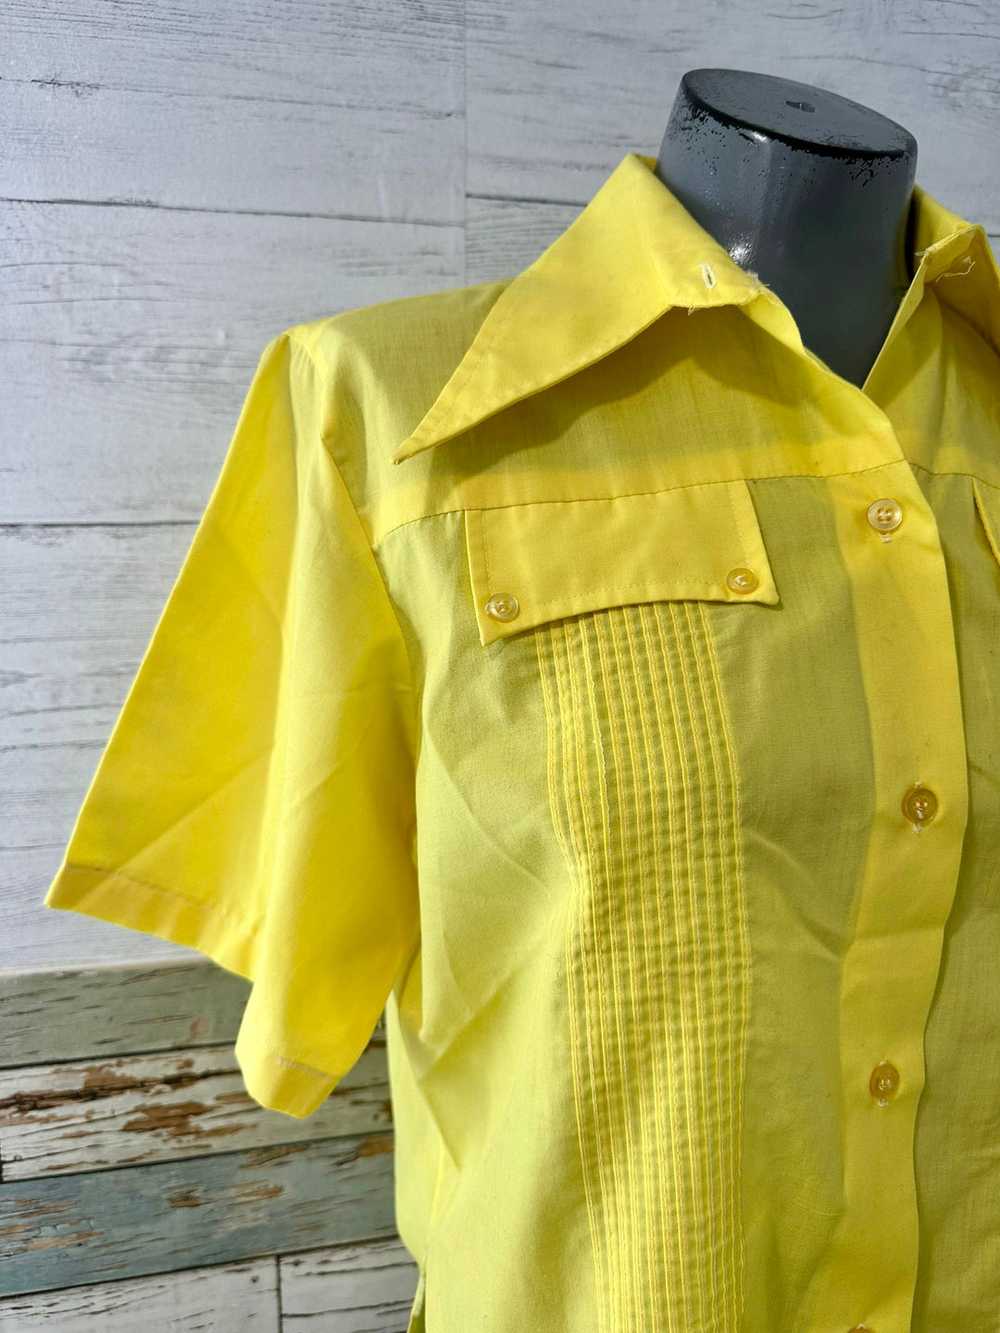 70’s Yellow Short Sleeve Shirt With Panels - image 4